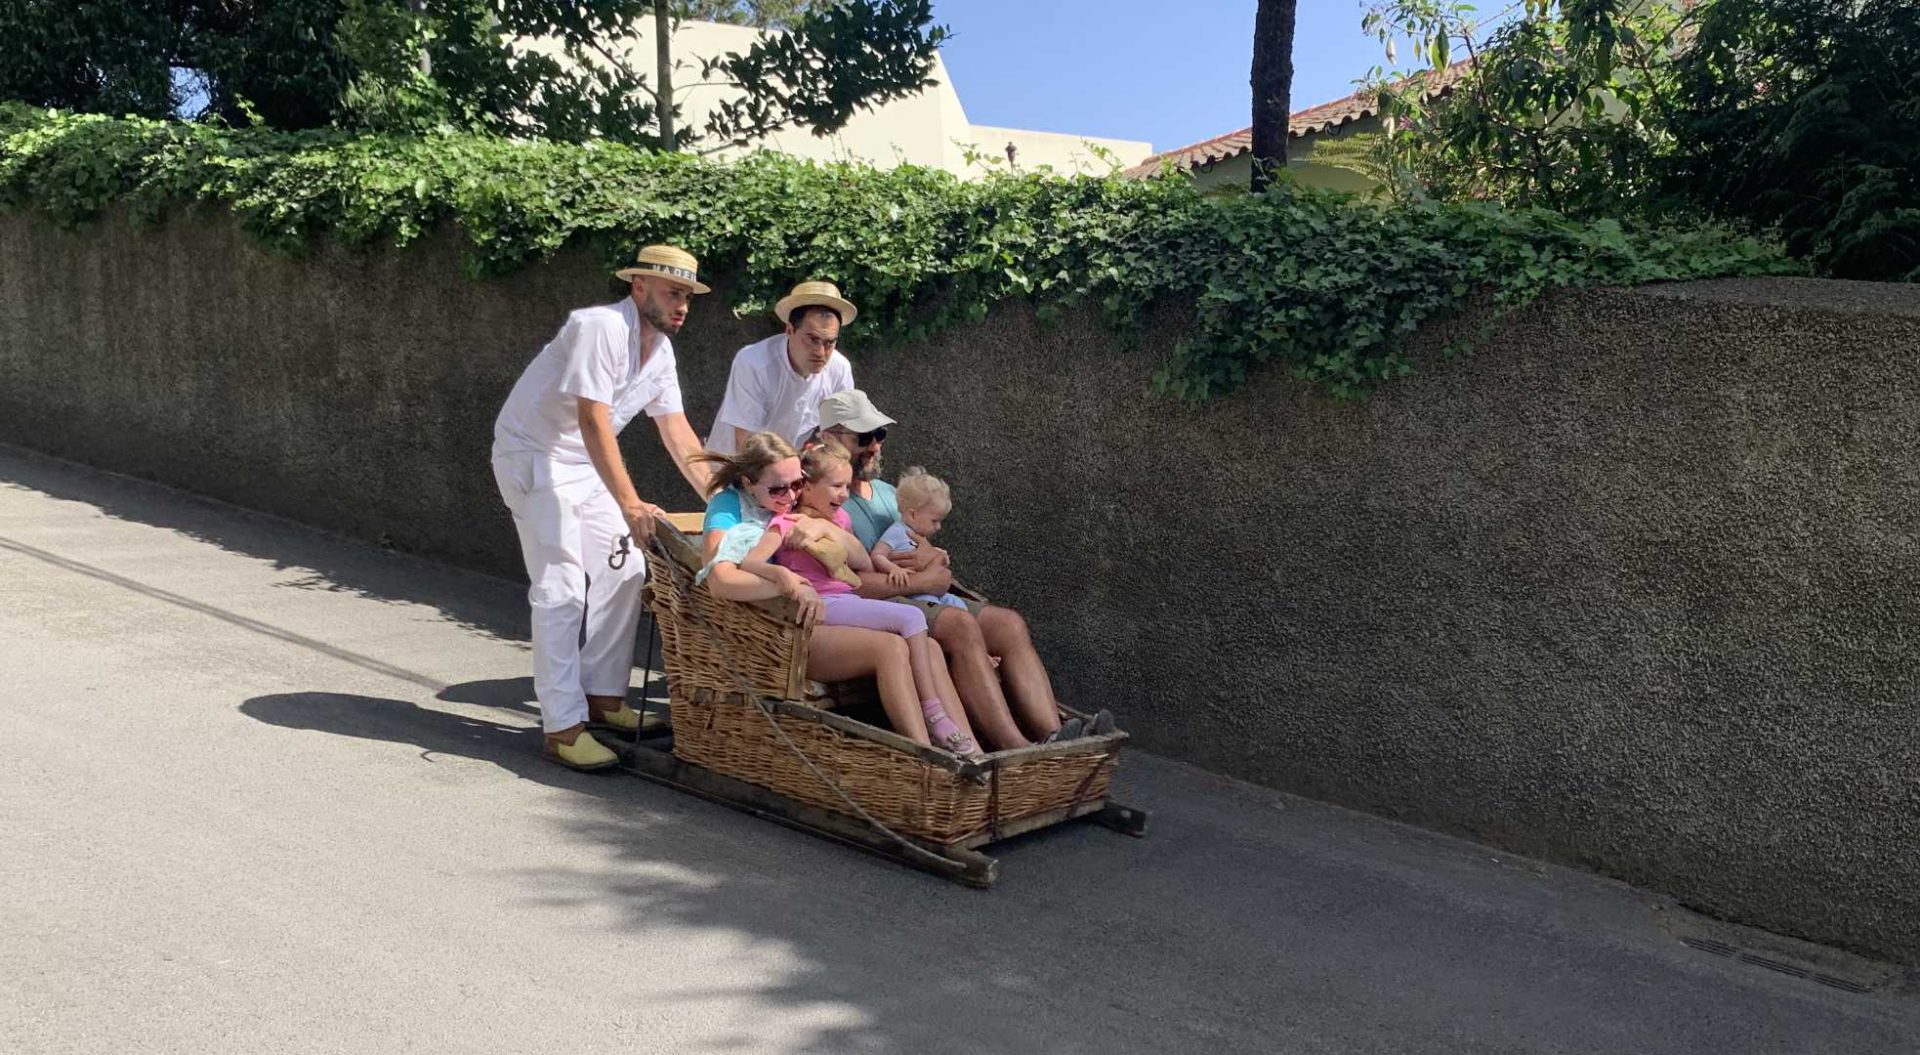 Funchal's traditional way down the hill. A toboggan!